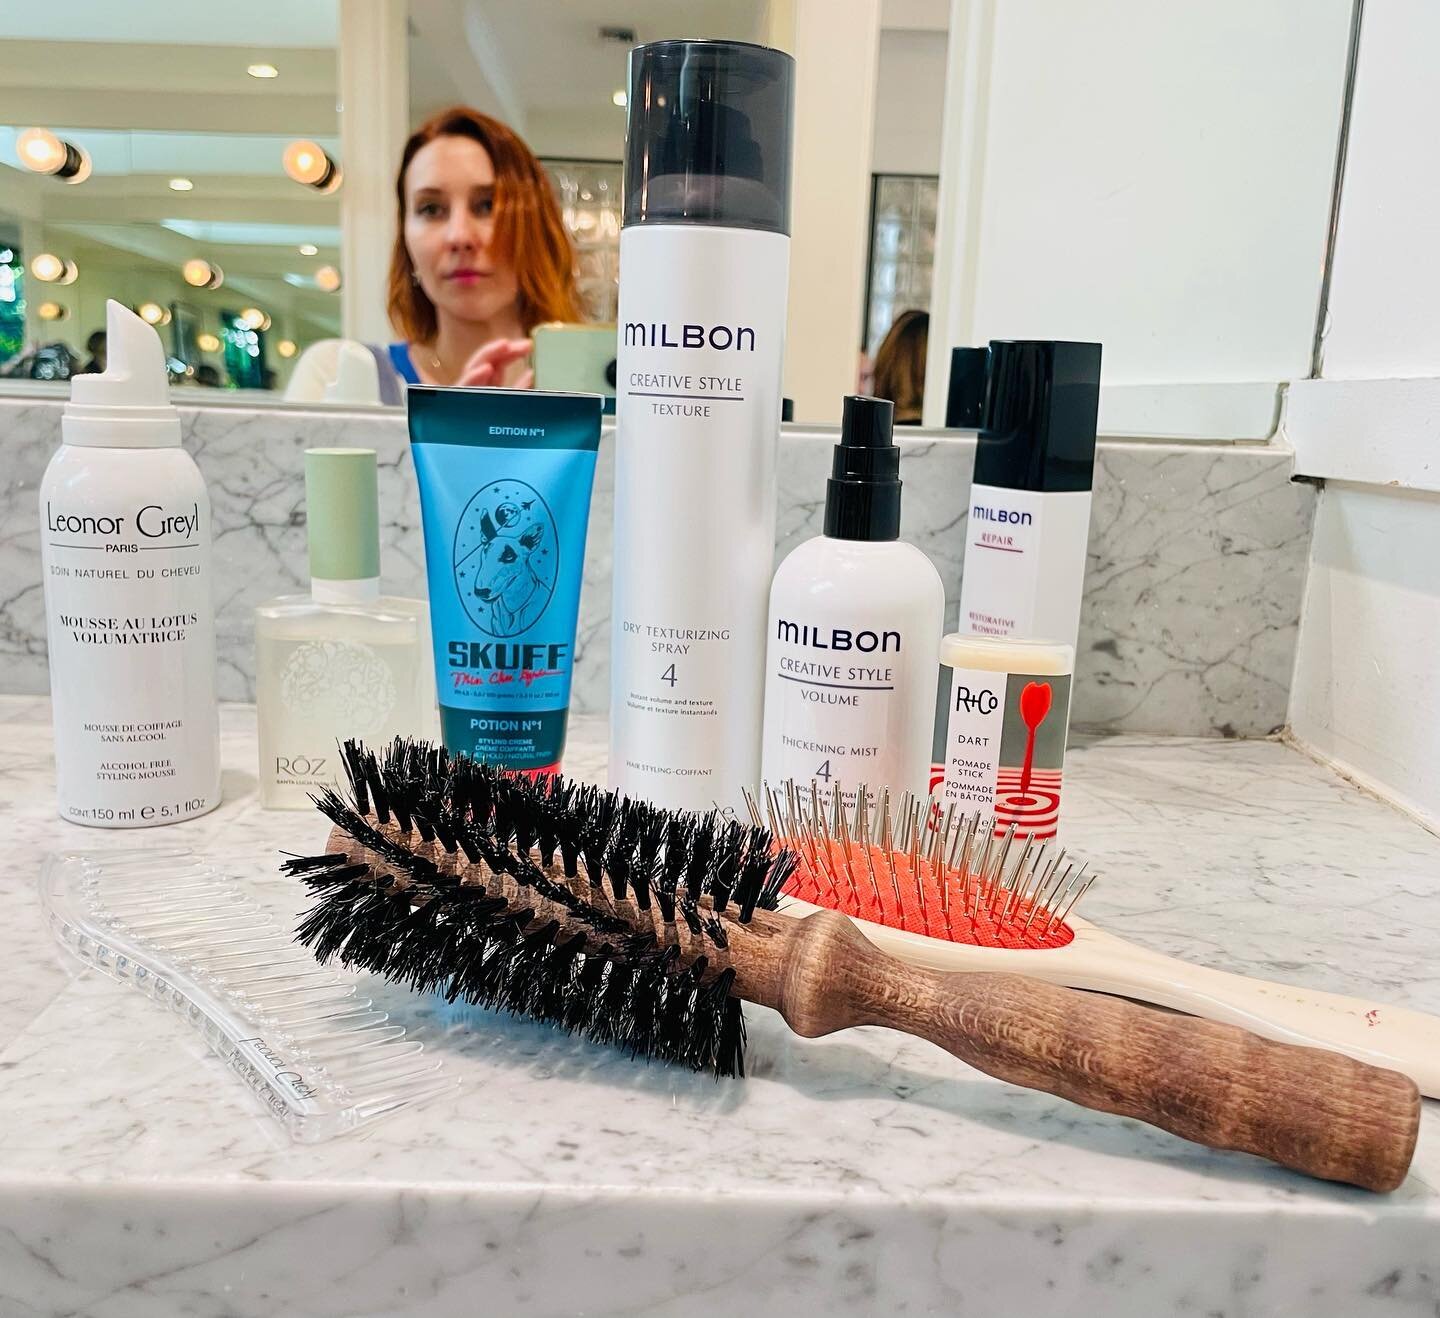 Here are my fav #hair #products!! We got #rozhair #milbonusa #houseofskuff #leonargreyl #ibizabrushes love love working with them!! By yours truly x ✨